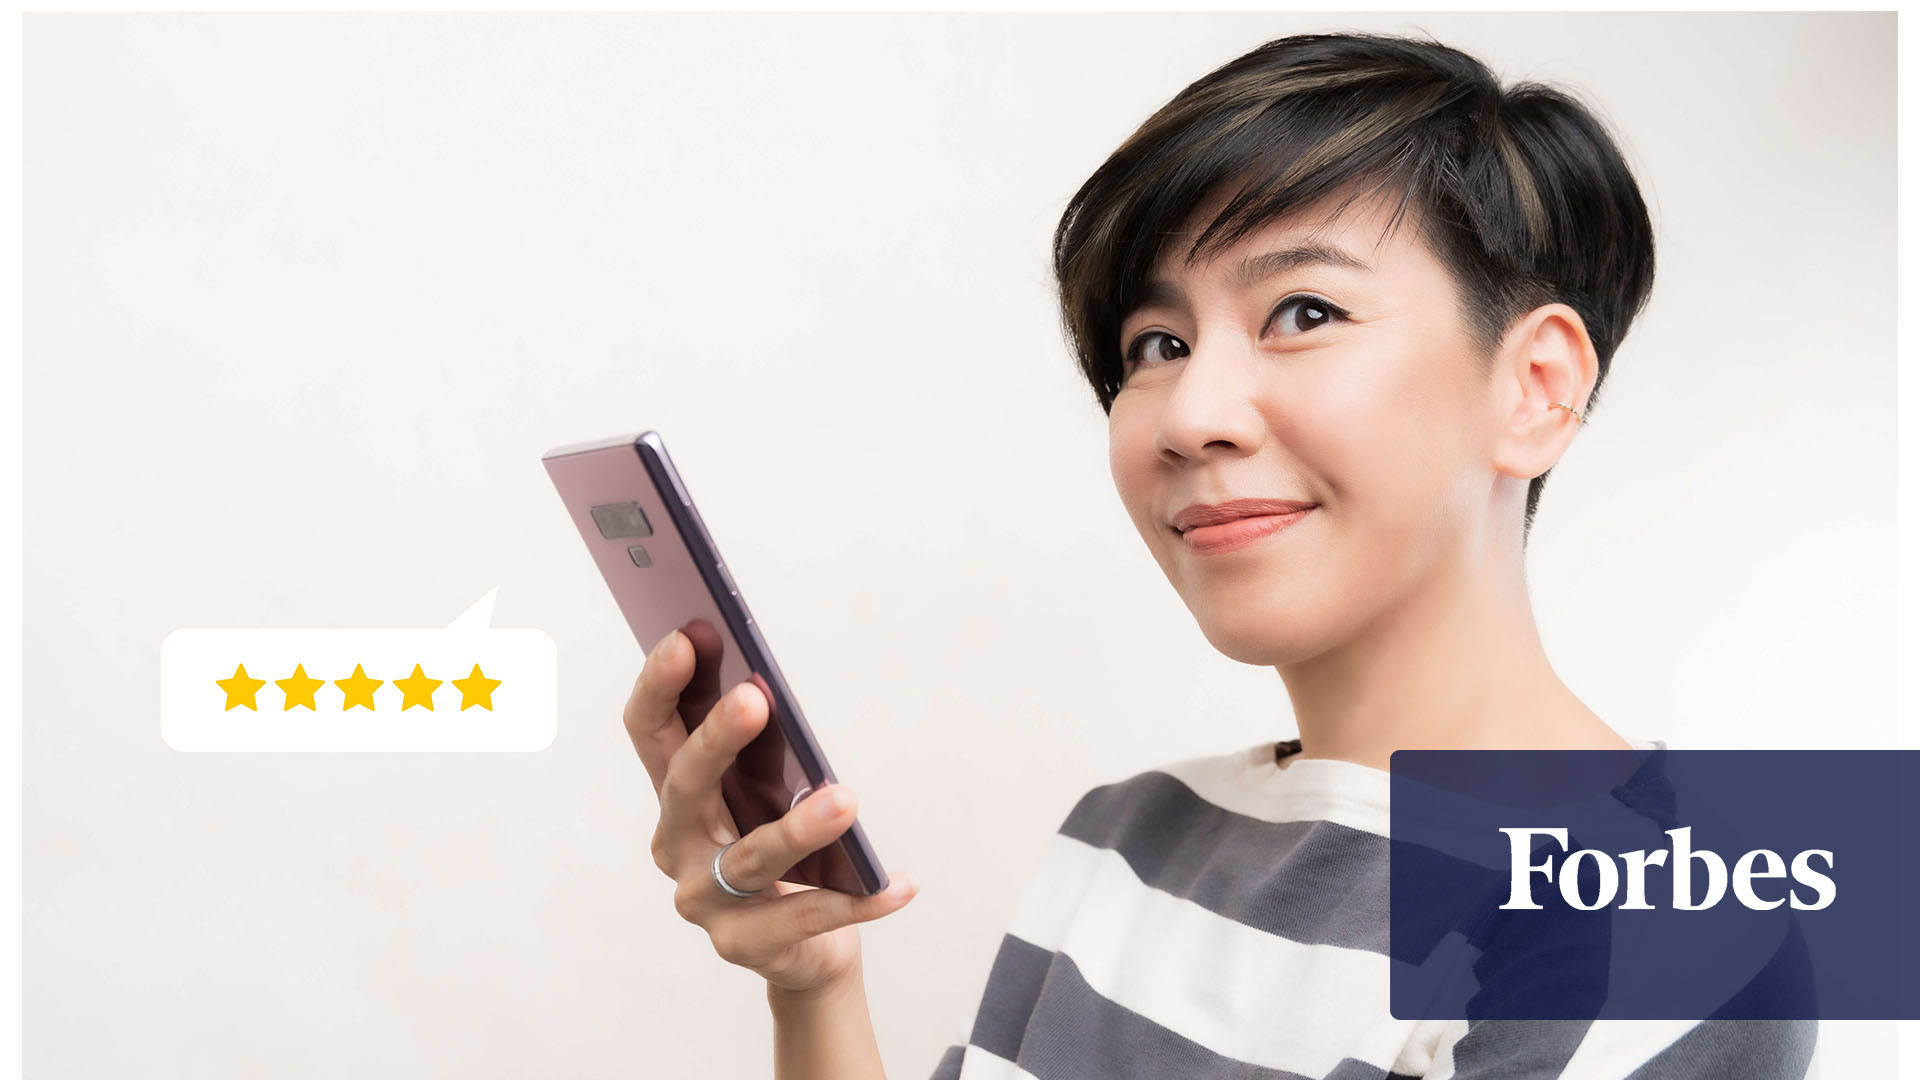 A smiling woman holds a phone with a five-star rating in a text bubble